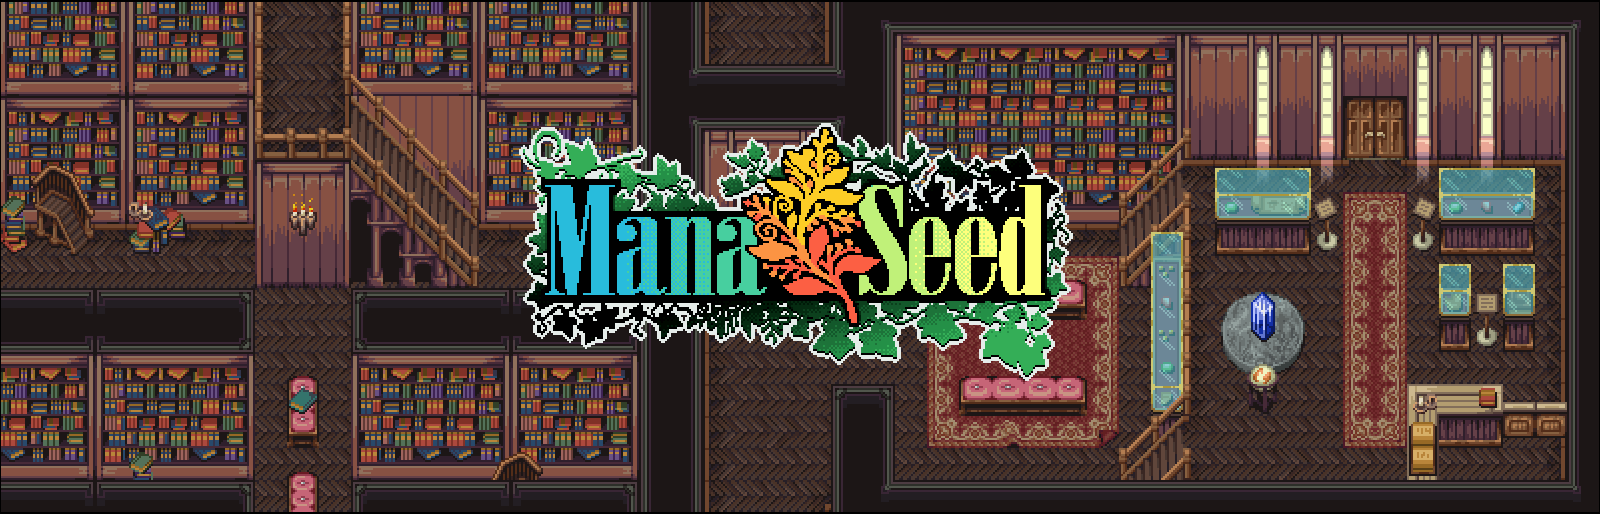 Pixel Art Font - Mana Seed Font Collection